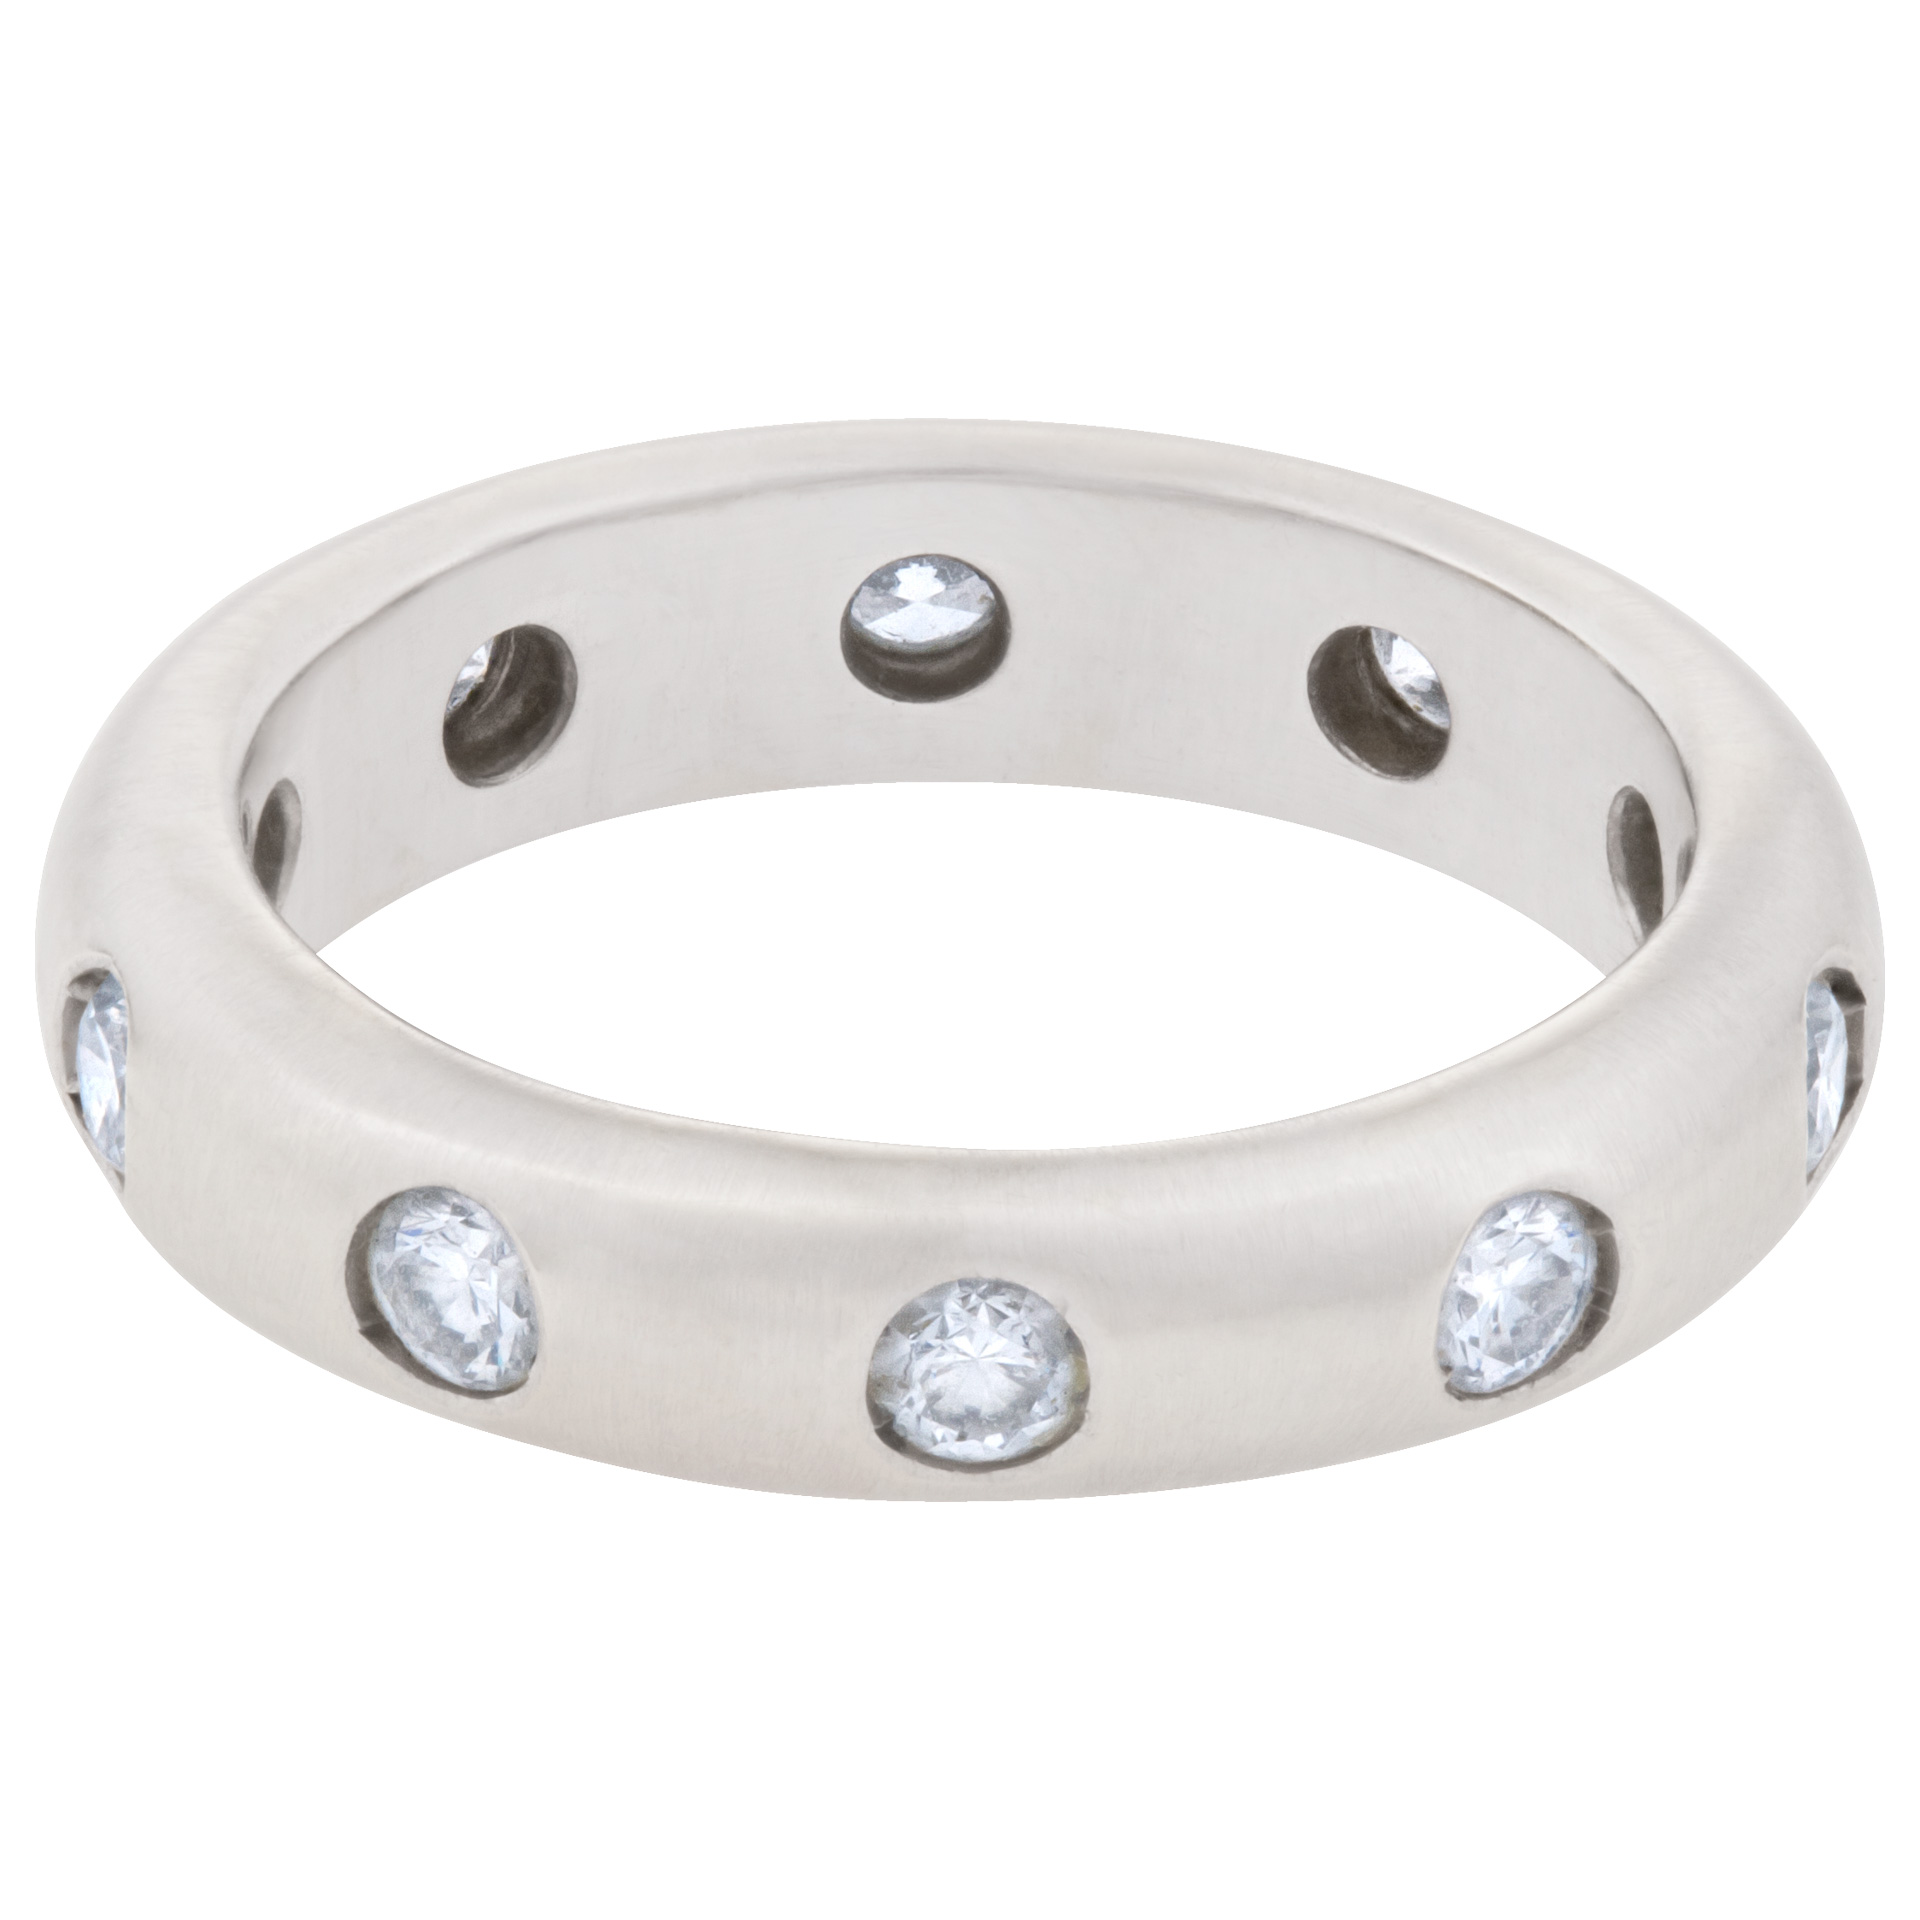 Sparkling 18k matte white gold band with diamonds. 1.00 carats. Size 6 image 1